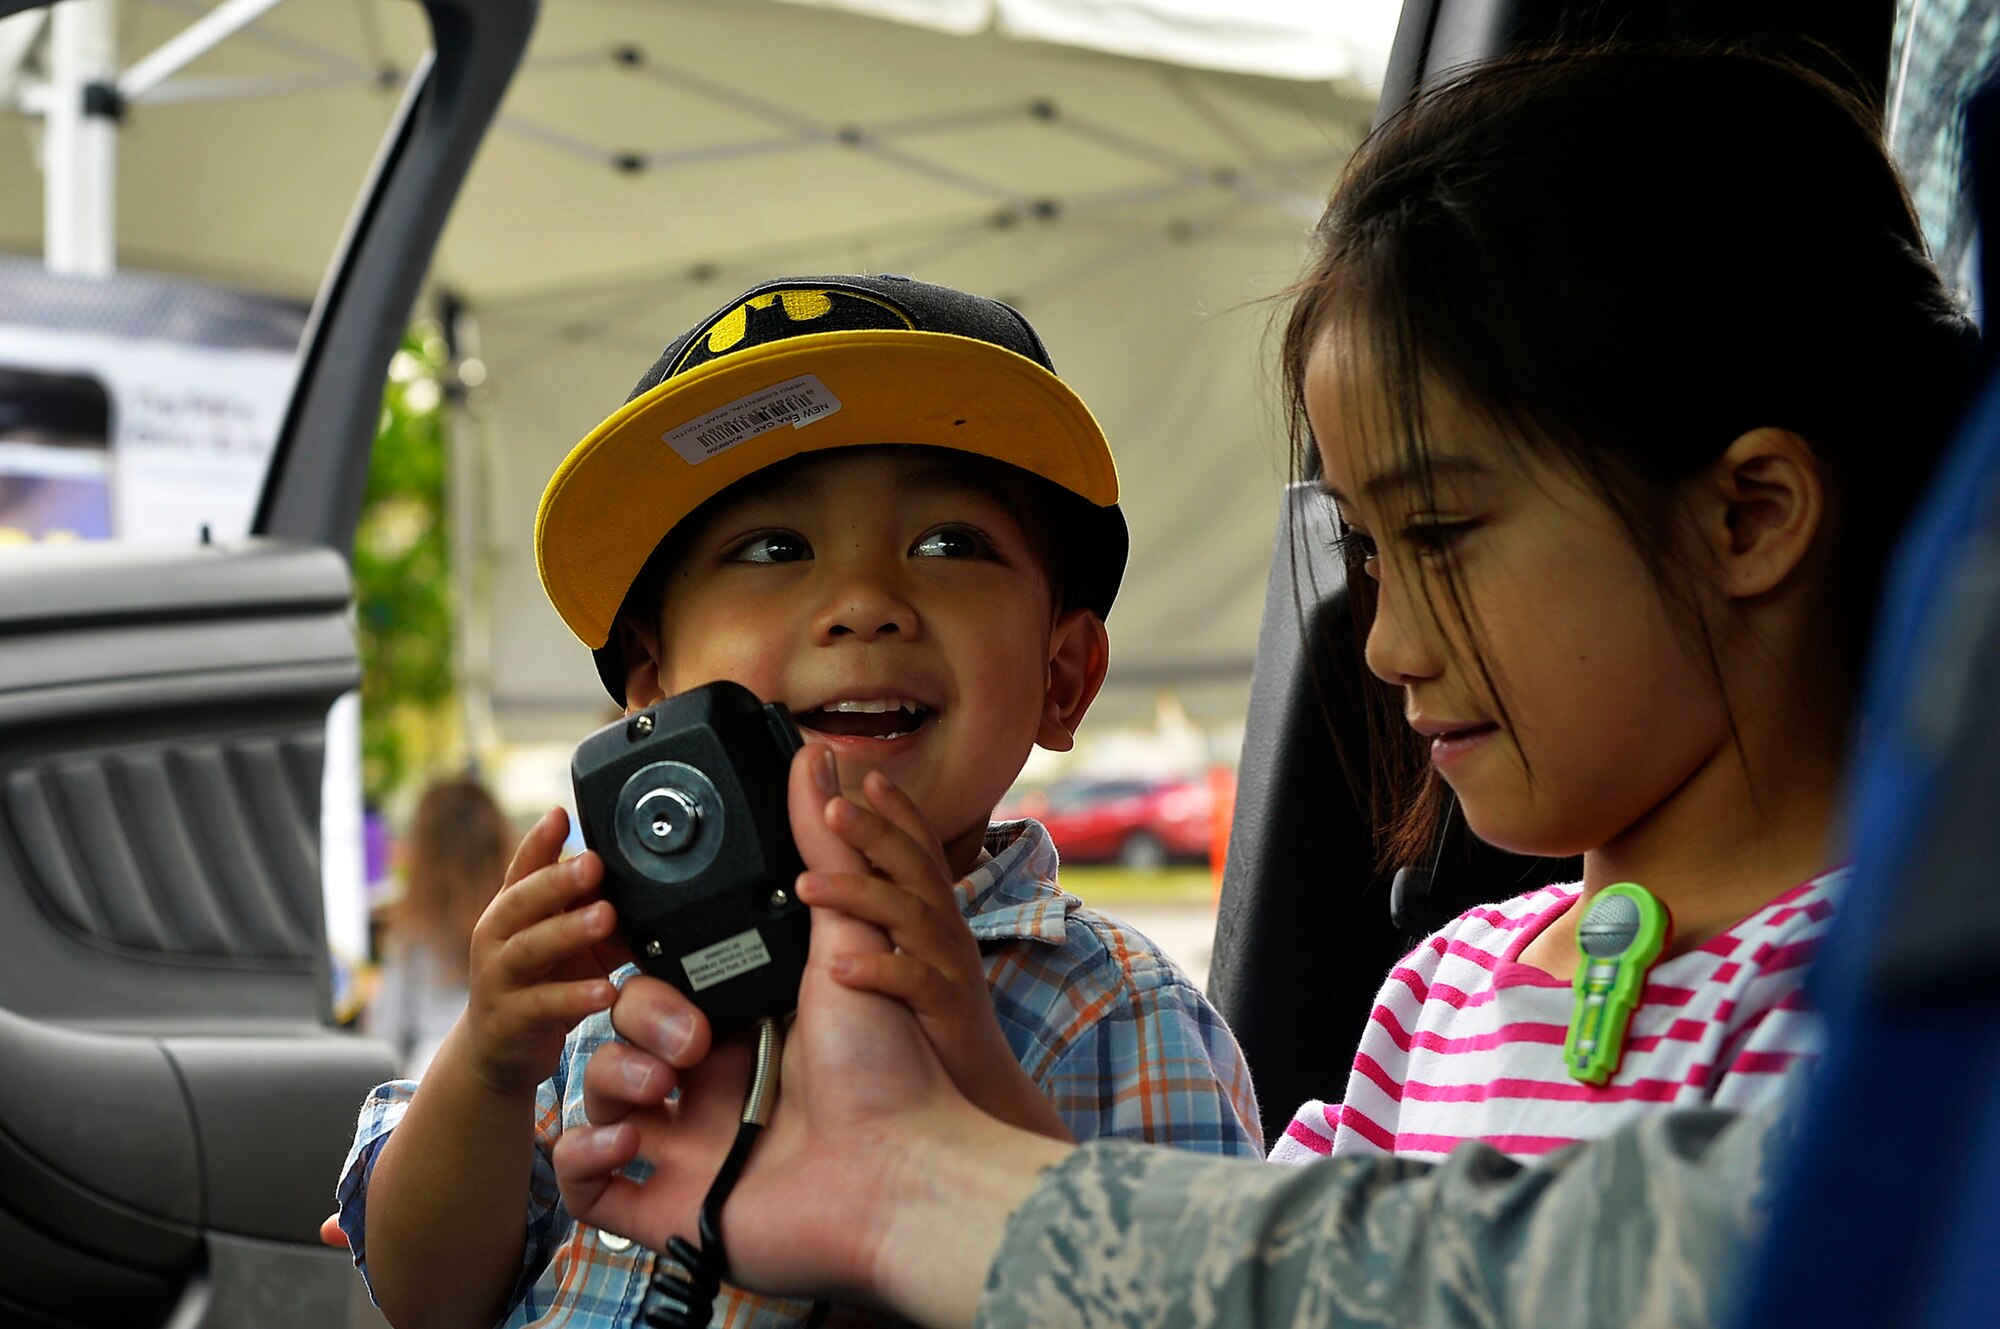 Children familiarize themselves with the public announcement system of a police vehicle on Ramstein Air Base, Germany, May 13, 2017. Ramstein hosted a family-friendly police display which included a variety of exhibits and static displays in support of Police Week. (U.S. Air Force photo by Airman 1st Class Joshua Magbanua) 